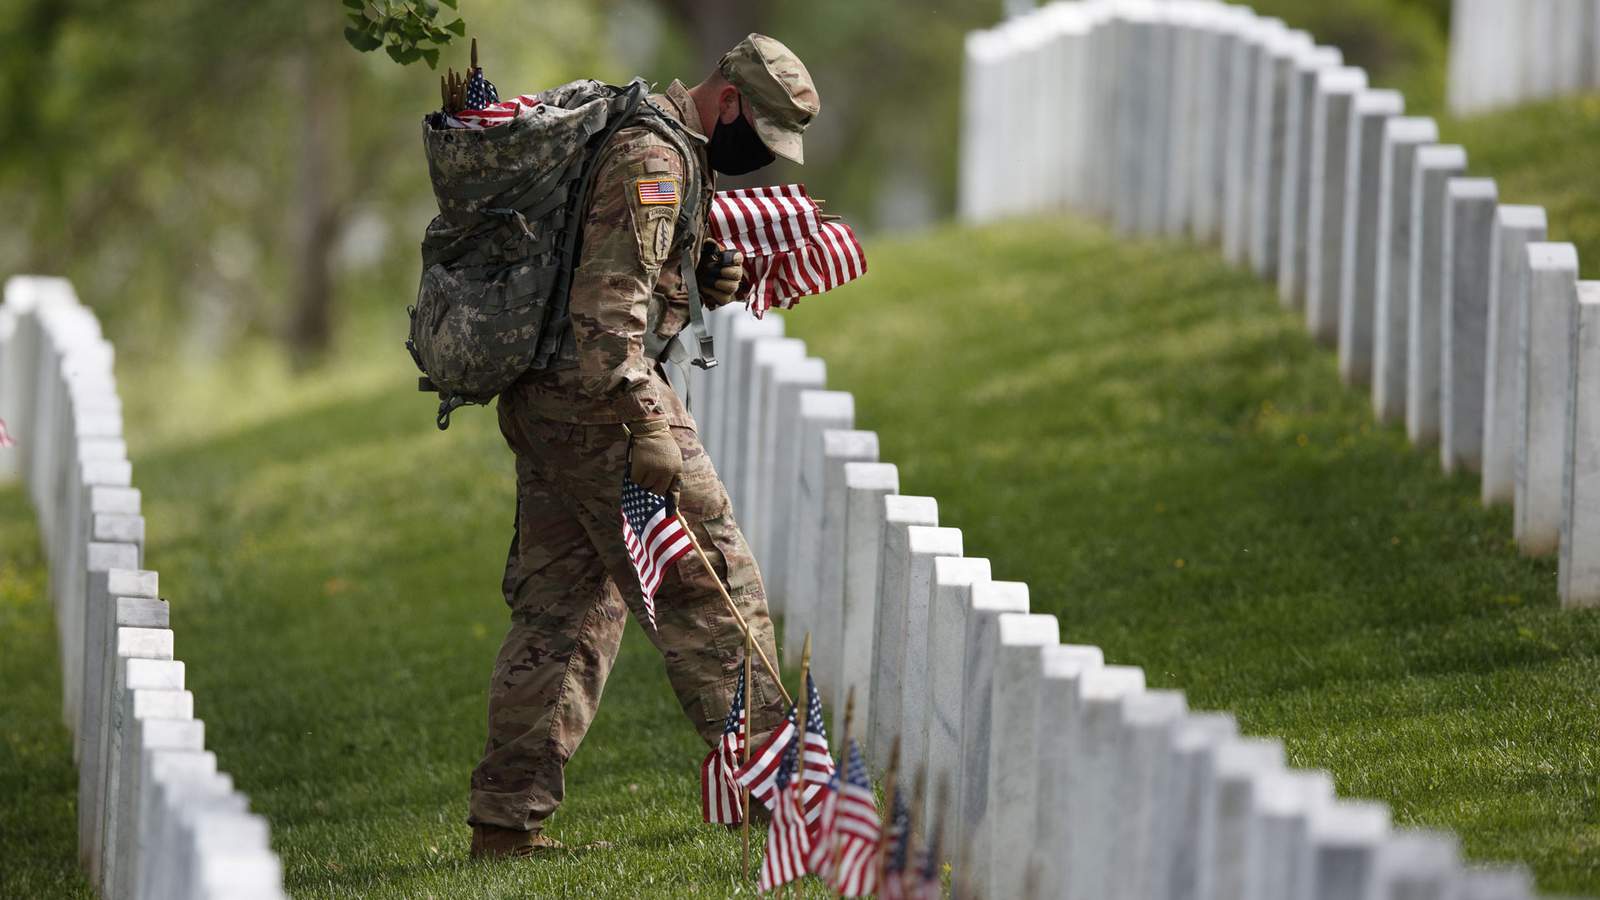 Many Memorial Day ceremonies go virtual this year